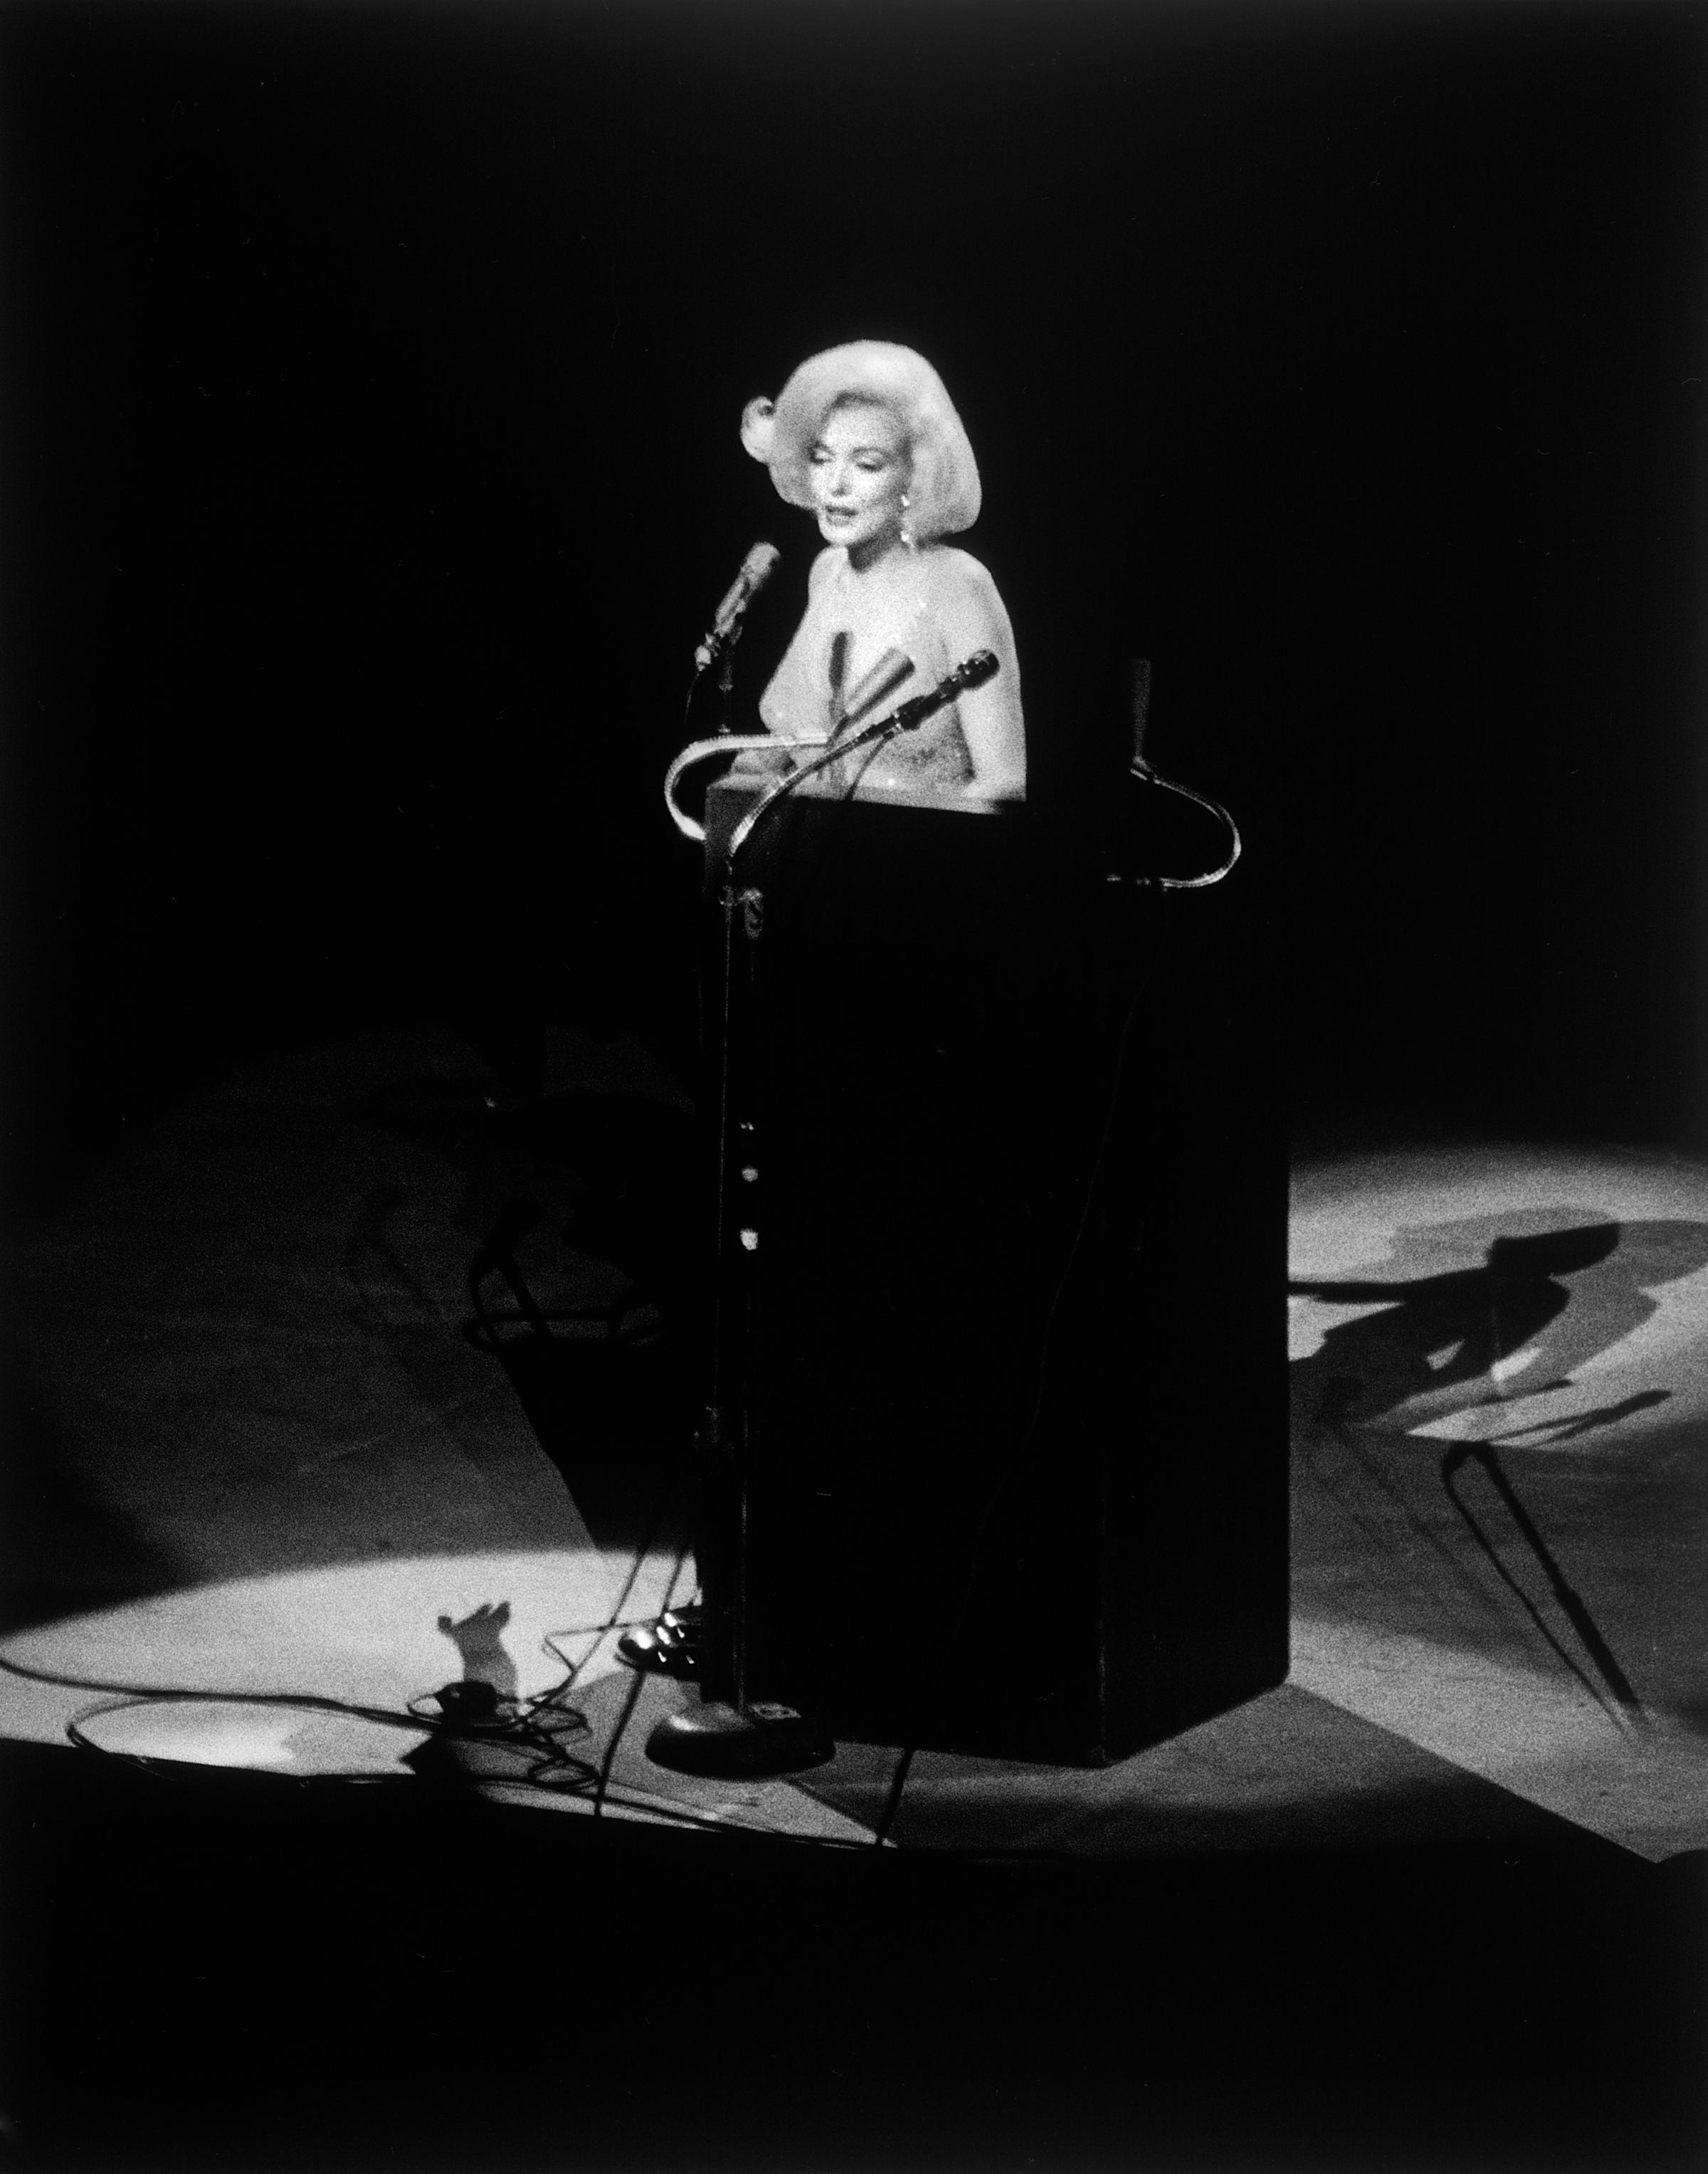 Monroe's famous rendition of "Happy Birthday," which she sang to President John F. Kennedy at Madison Square Garden on May 19, 1962.